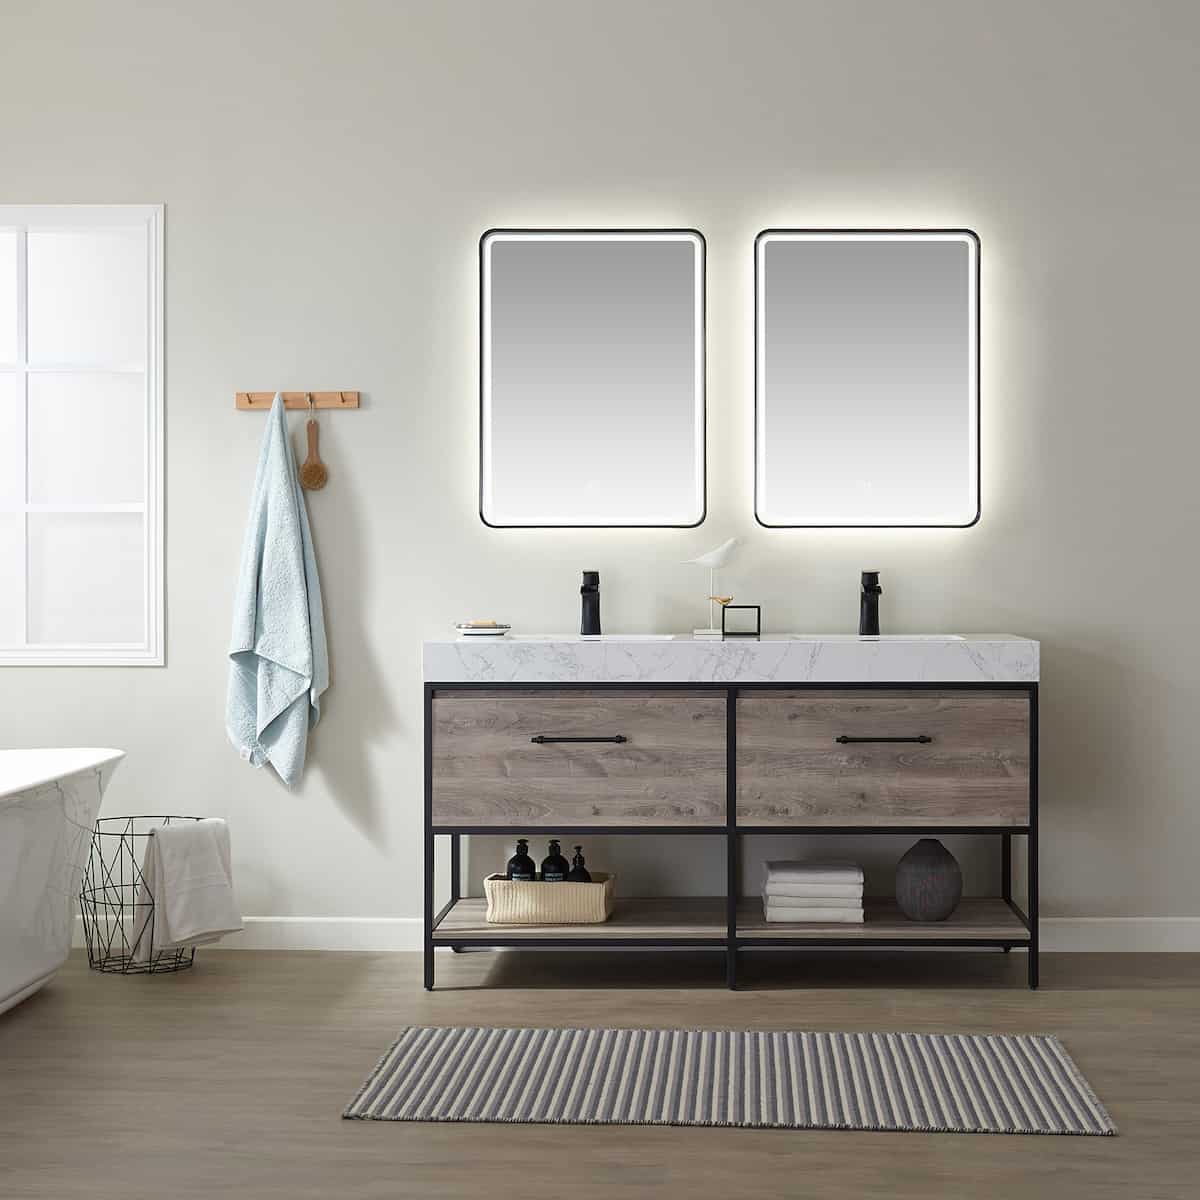 Vinnova Palma 60 Inch Freestanding Double Vanity in Mexican Oak with White Composite Grain Stone Countertop With Mirrors in Bathroom 701260-MXO-GW